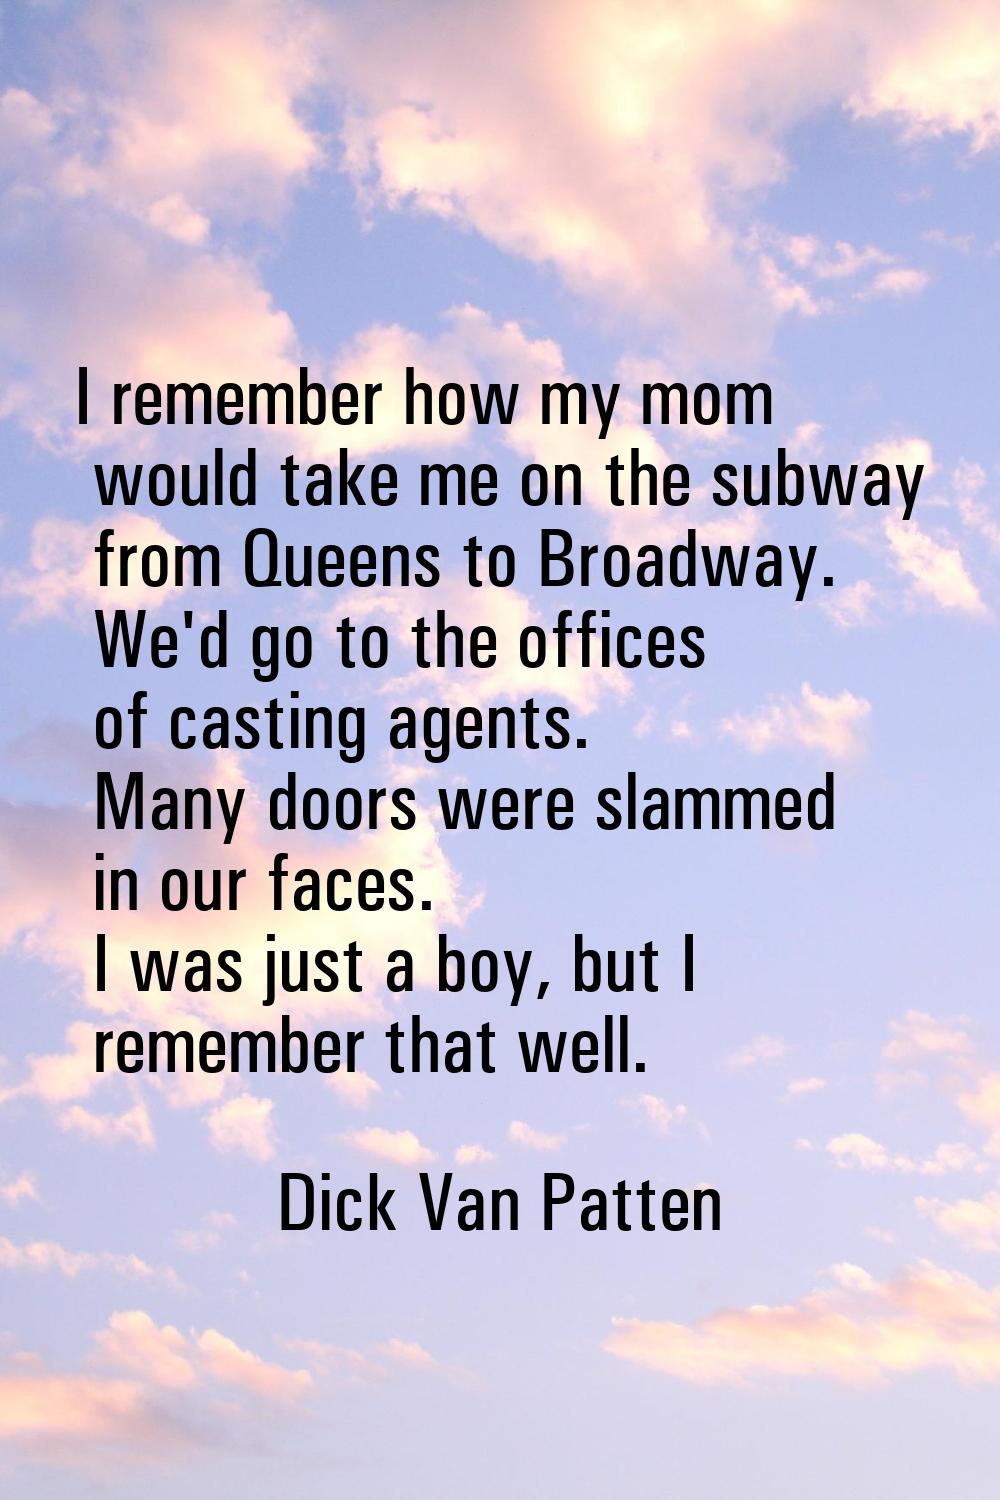 I remember how my mom would take me on the subway from Queens to Broadway. We'd go to the offices o